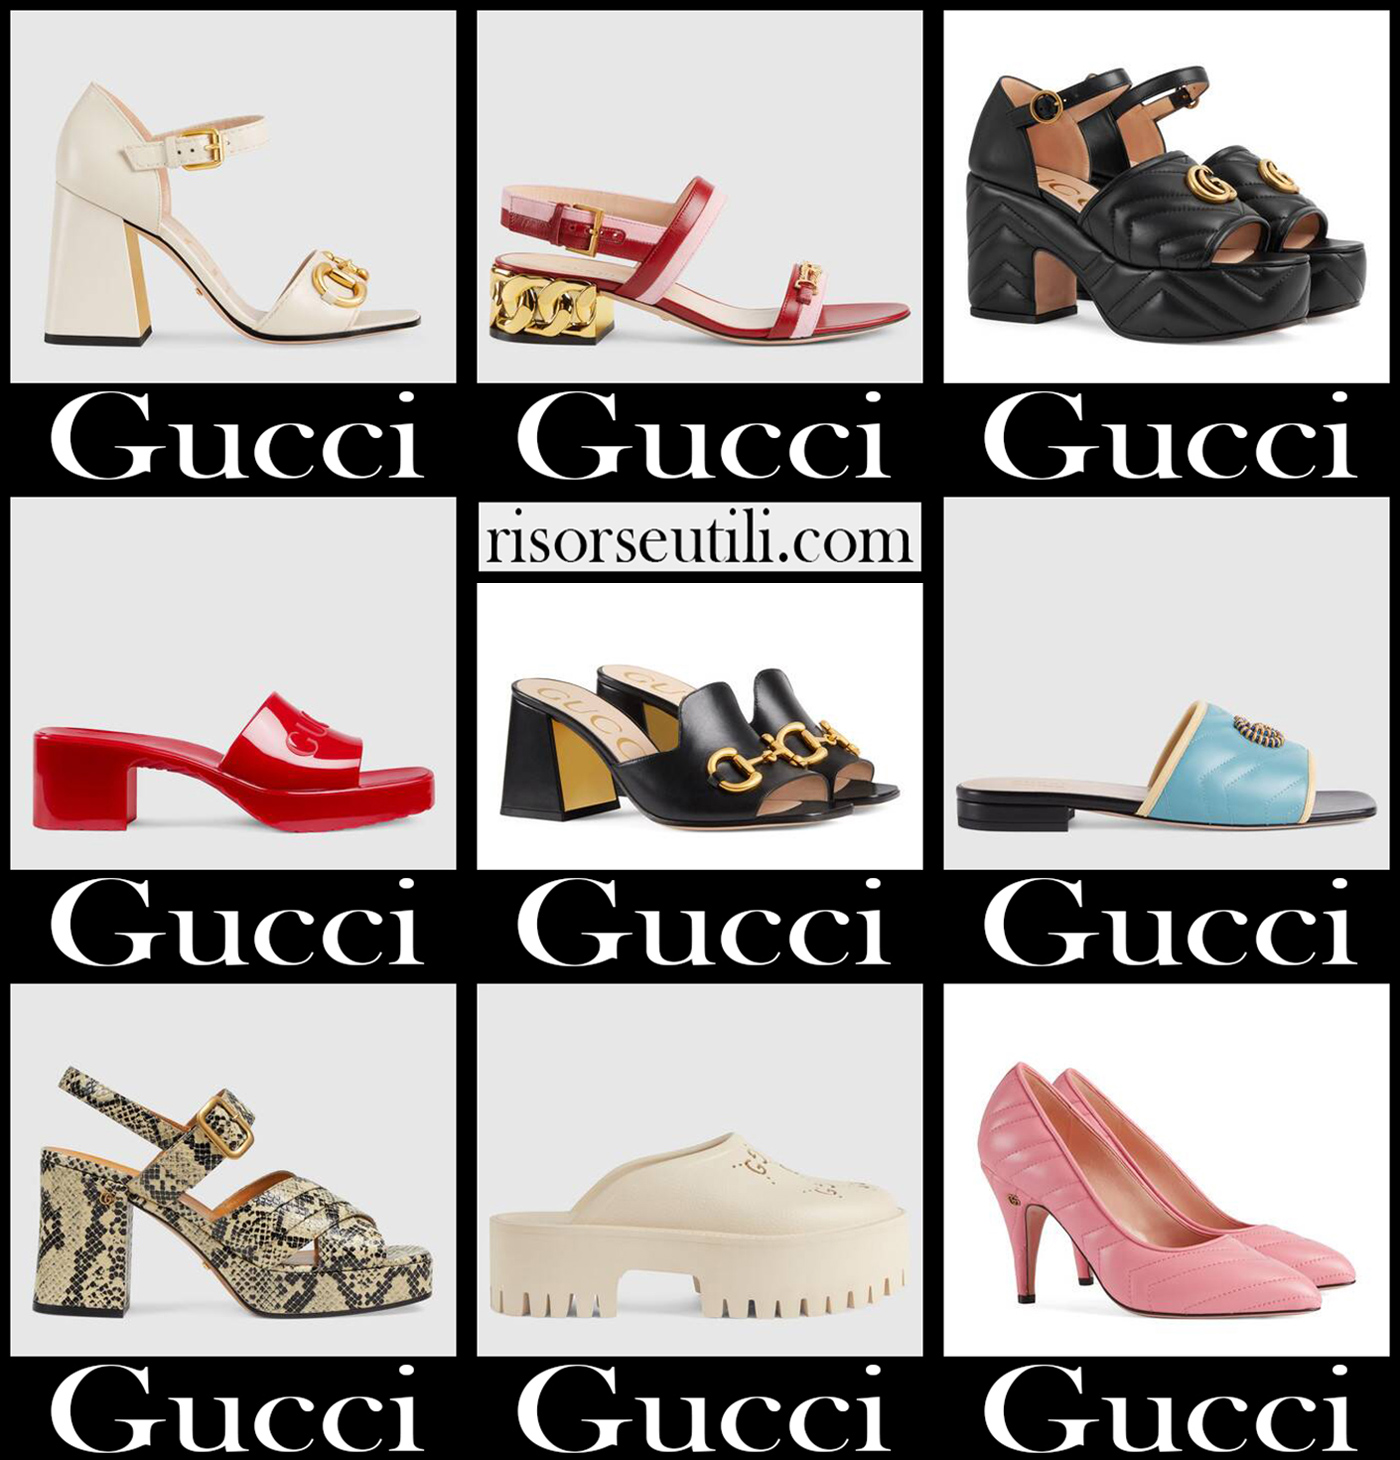 New arrivals Gucci shoes accessories womens footwear